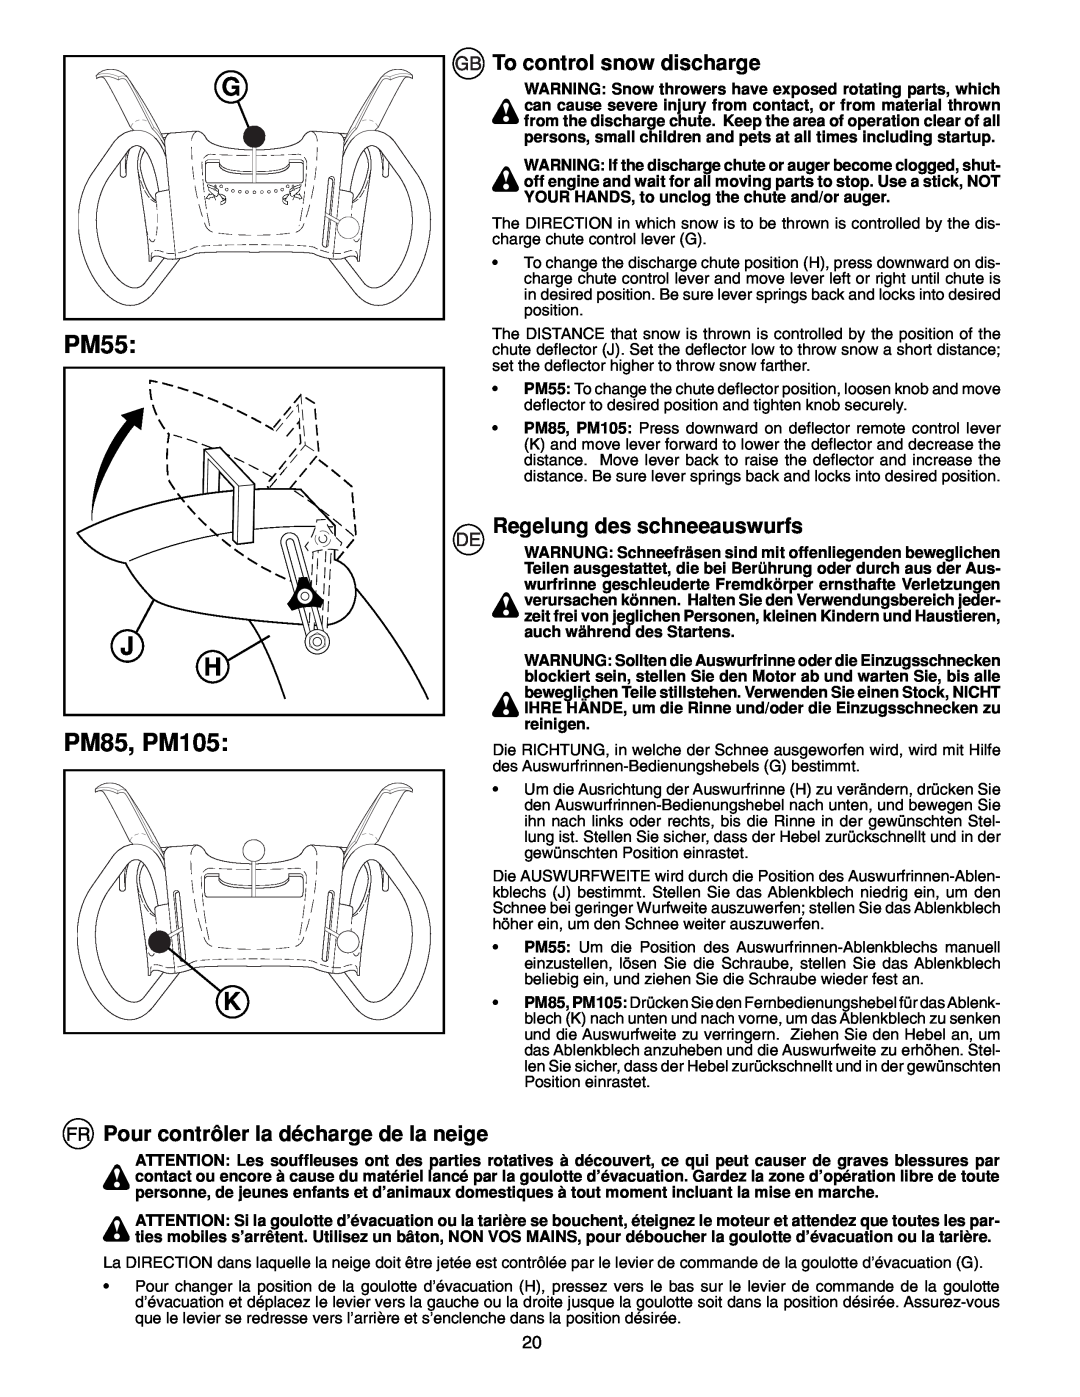 McCulloch instruction manual G PM55 J H PM85, PM105 K, To control snow discharge, Regelung des schneeauswurfs 